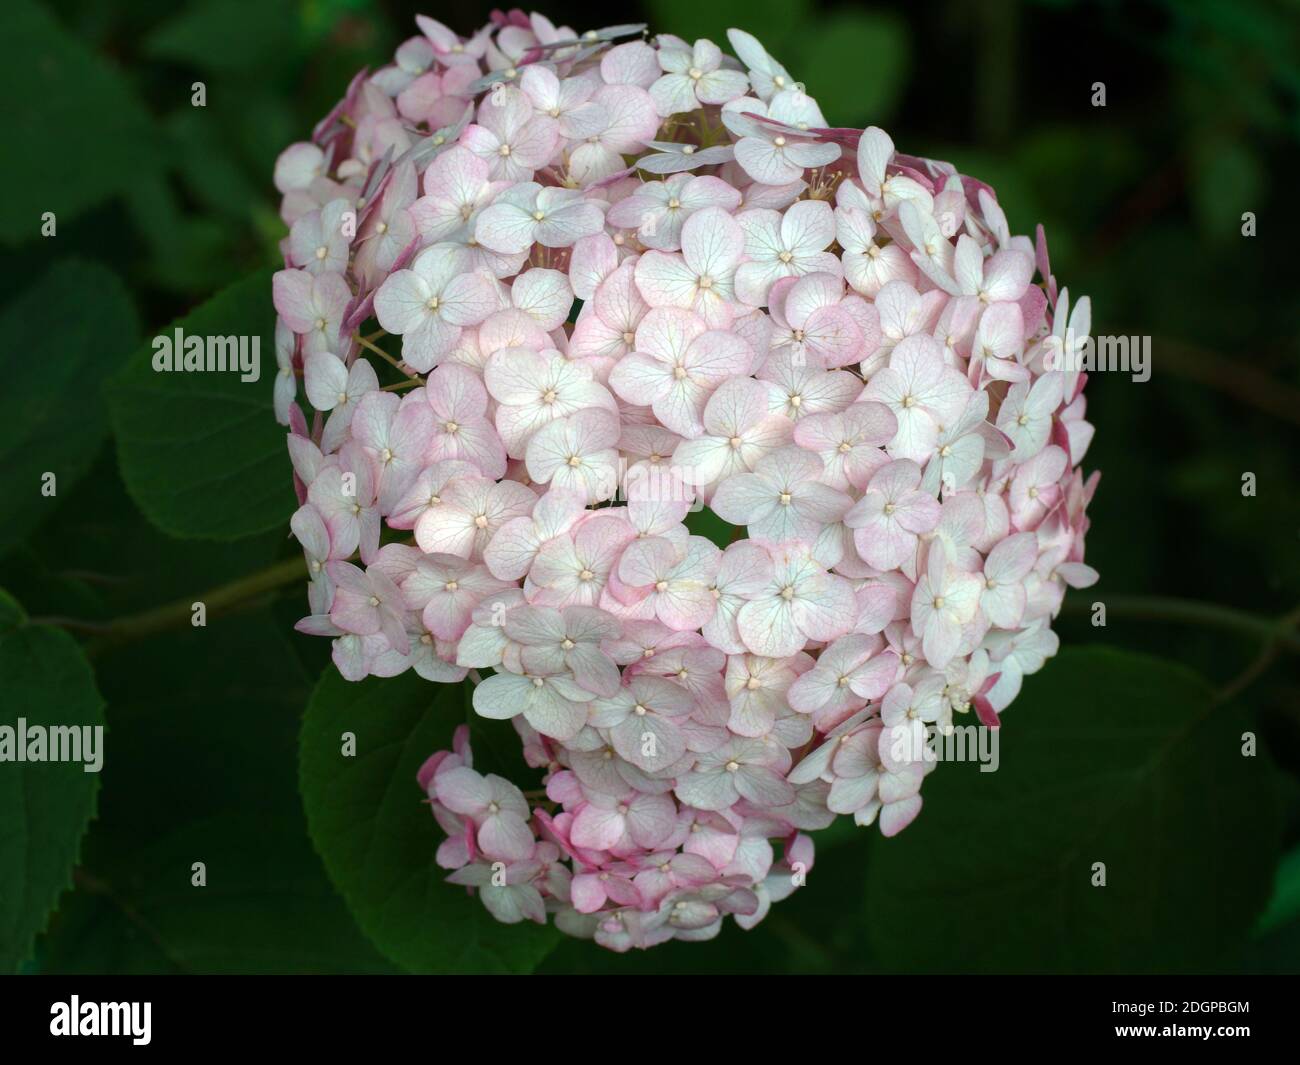 Hydrangea arborescens Candybelle Lollypop or  Bubblegum pink a corymb. Flower close up. Hydrangea arborescens, smooth hydrangea, wild hydrangea Stock Photo